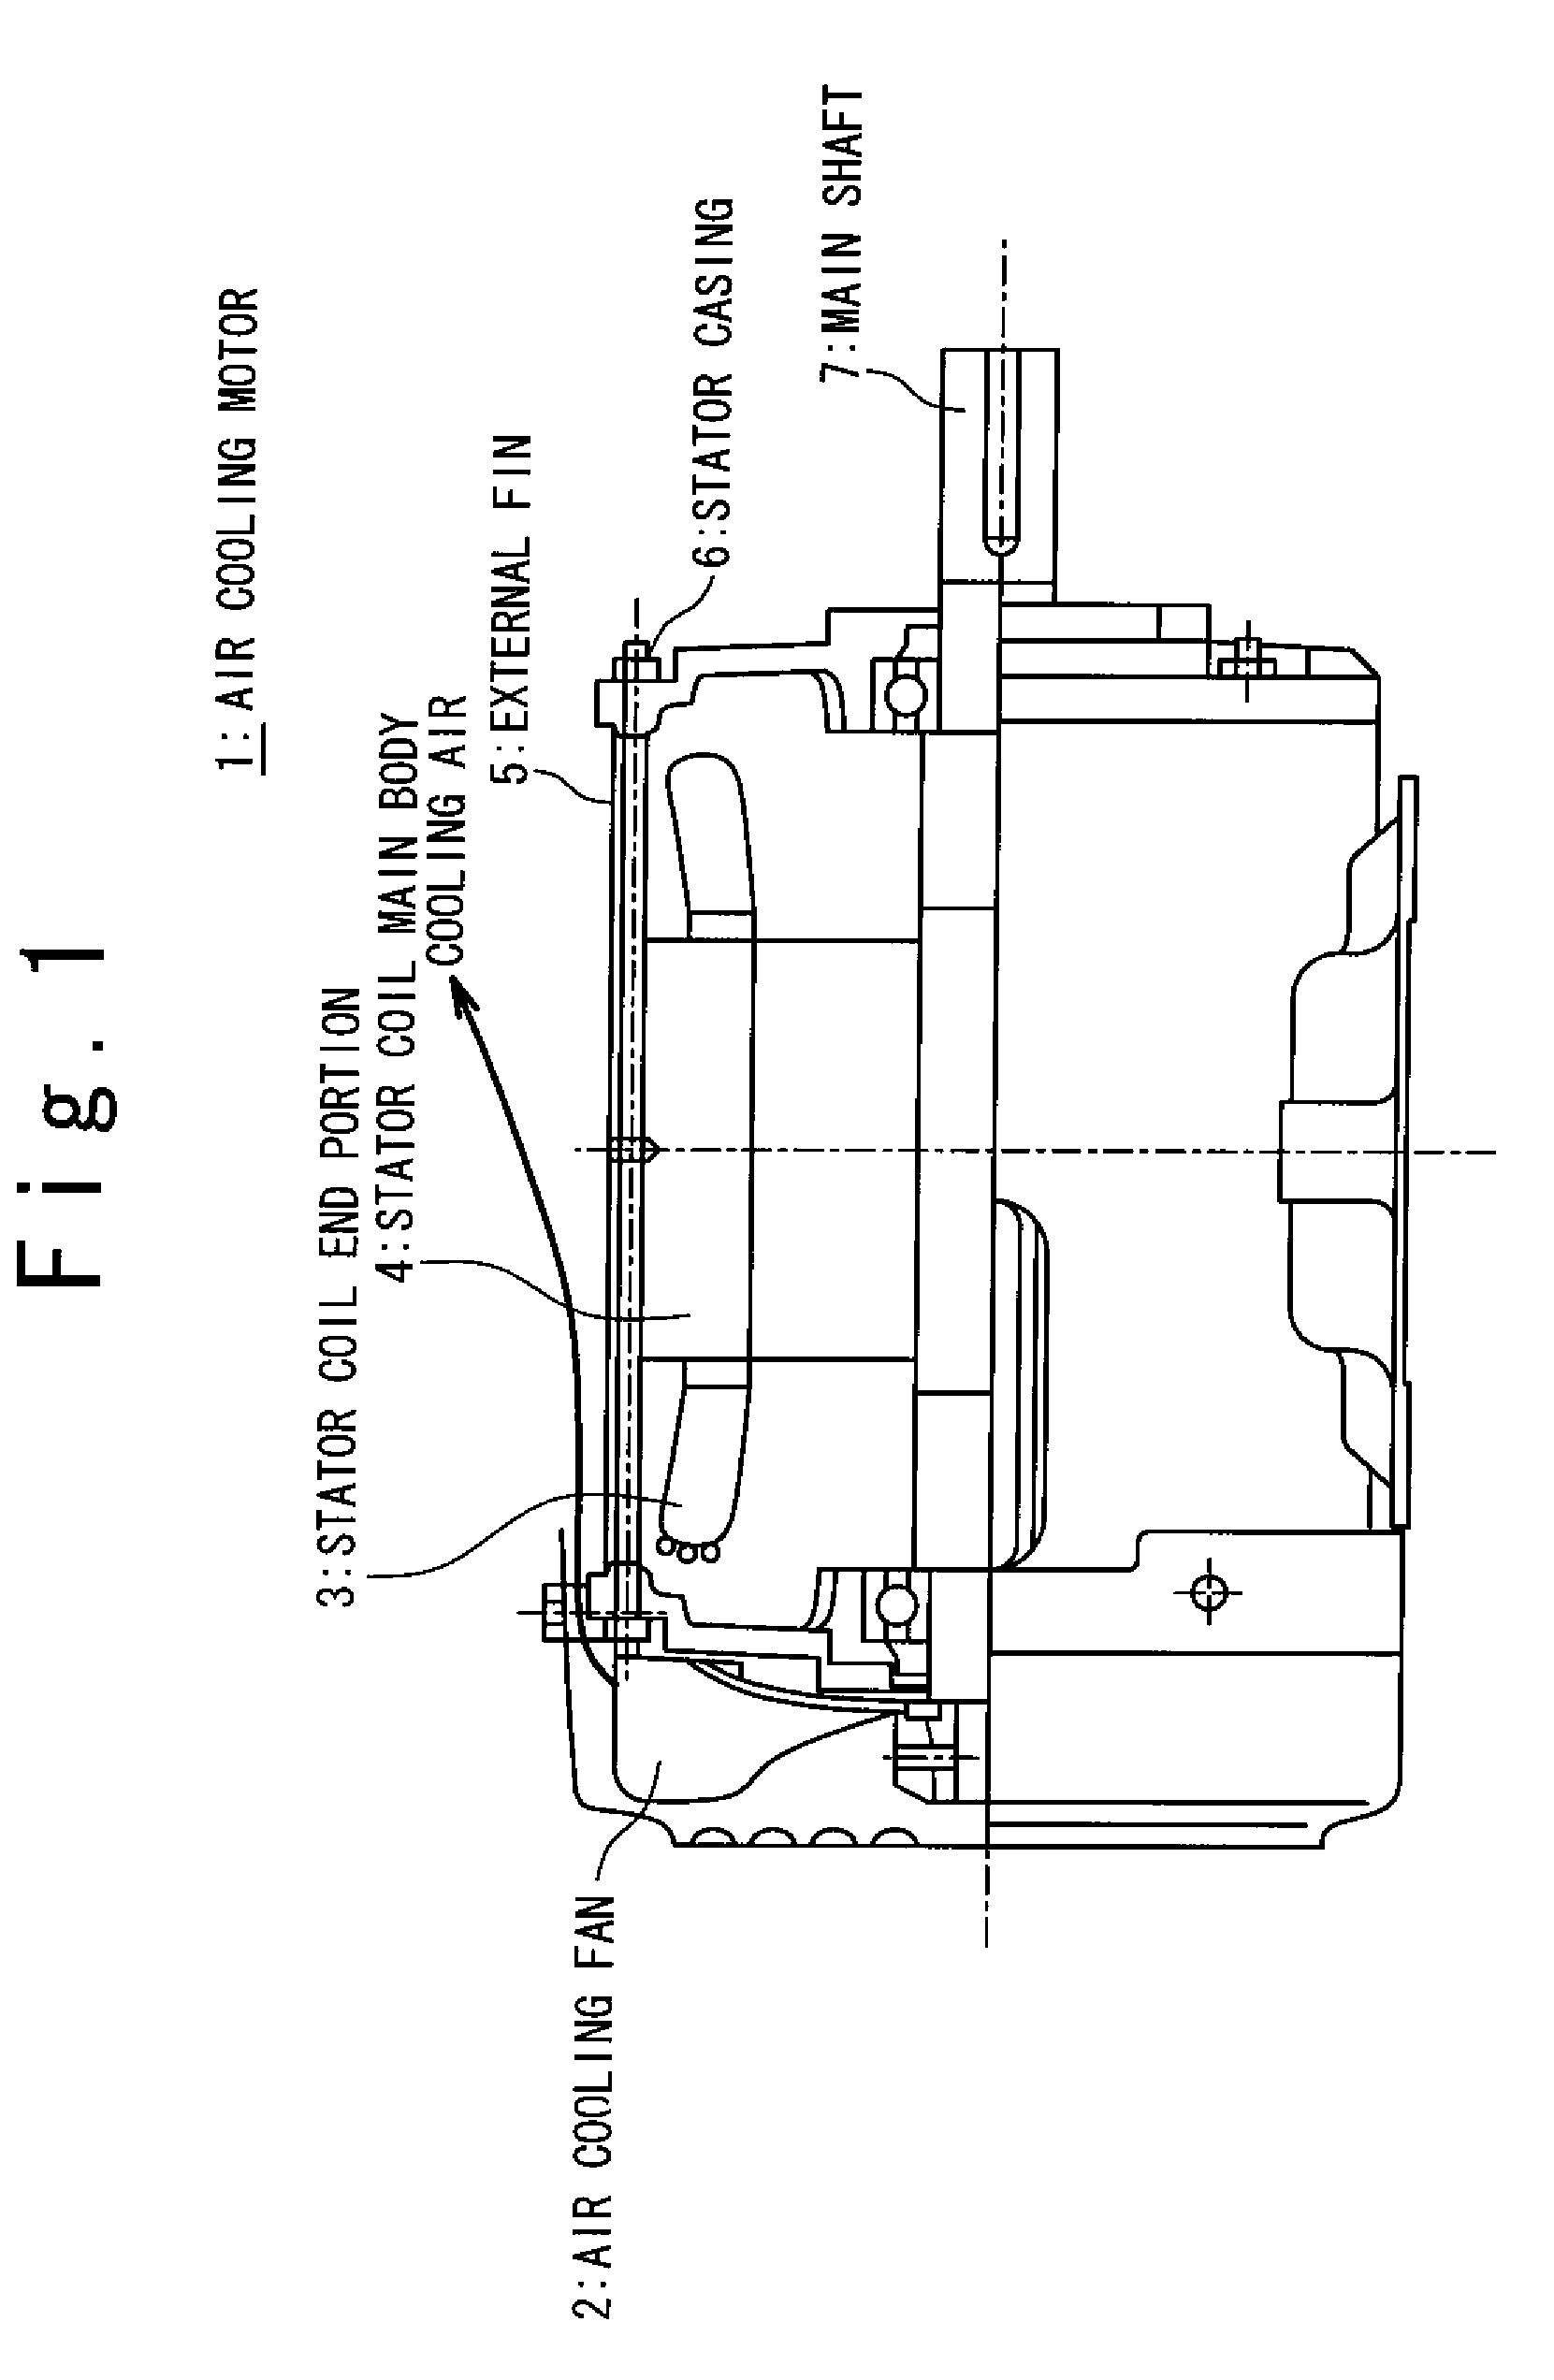 Air refrigerant type cooling apparatus and air refrigerant cooling/heating system using refrigerant type cooling apparatus